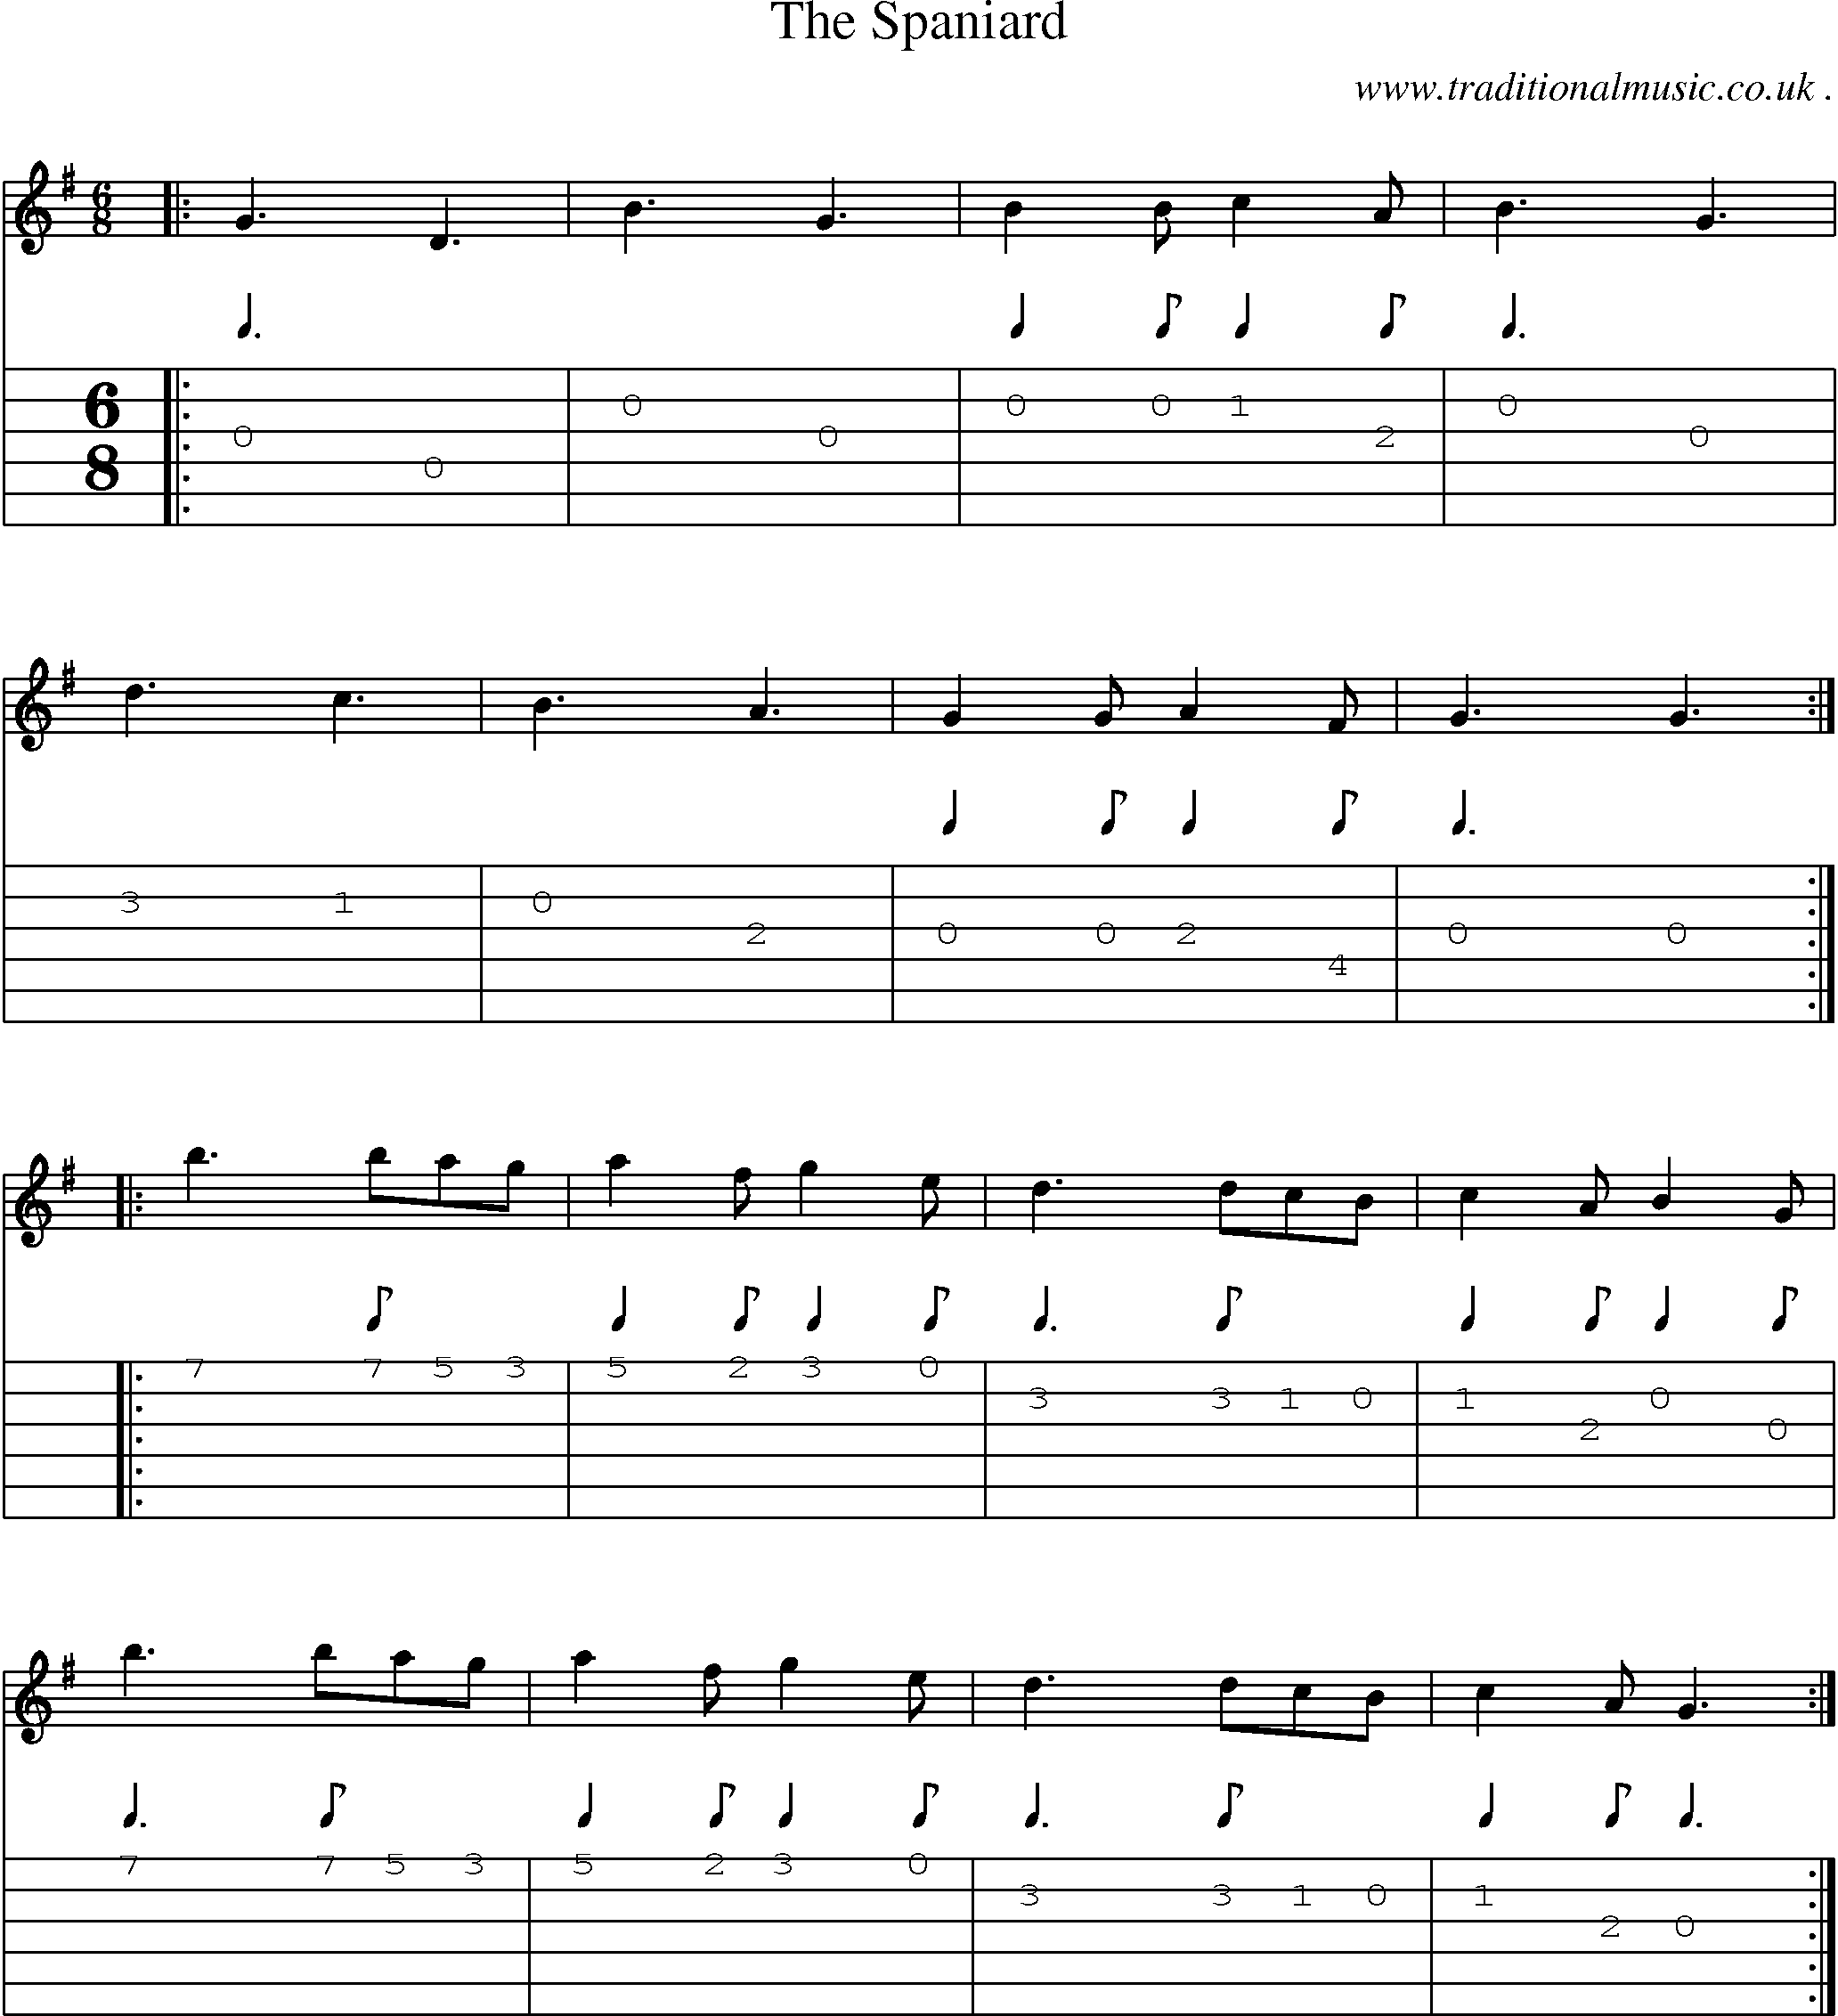 Sheet-Music and Guitar Tabs for The Spaniard